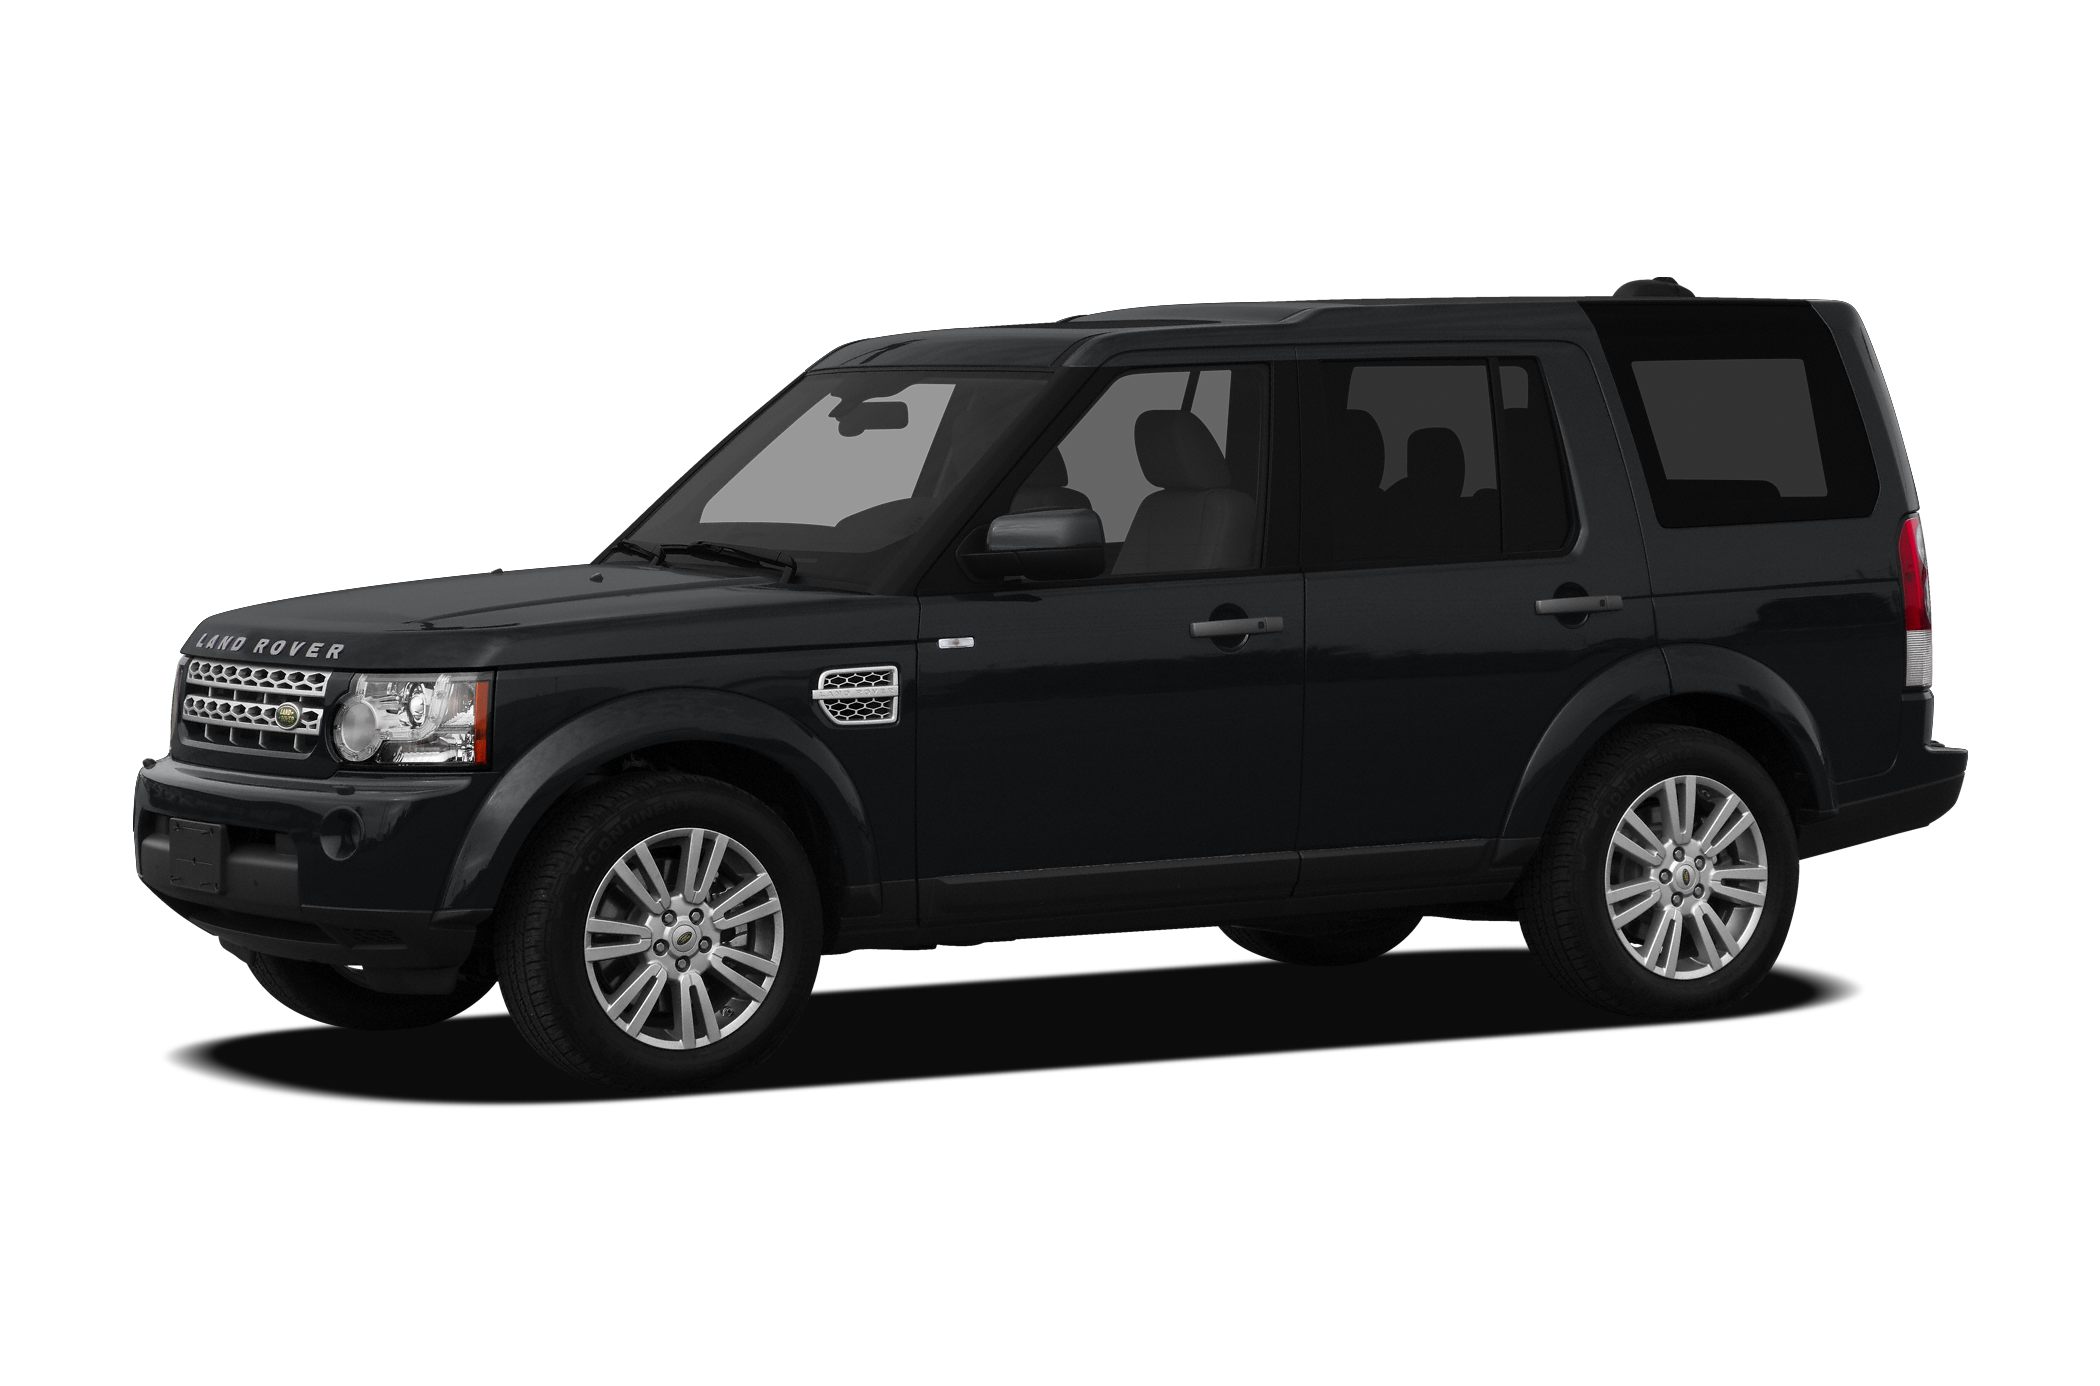 2011 Land Rover Lr4 Specs And Prices